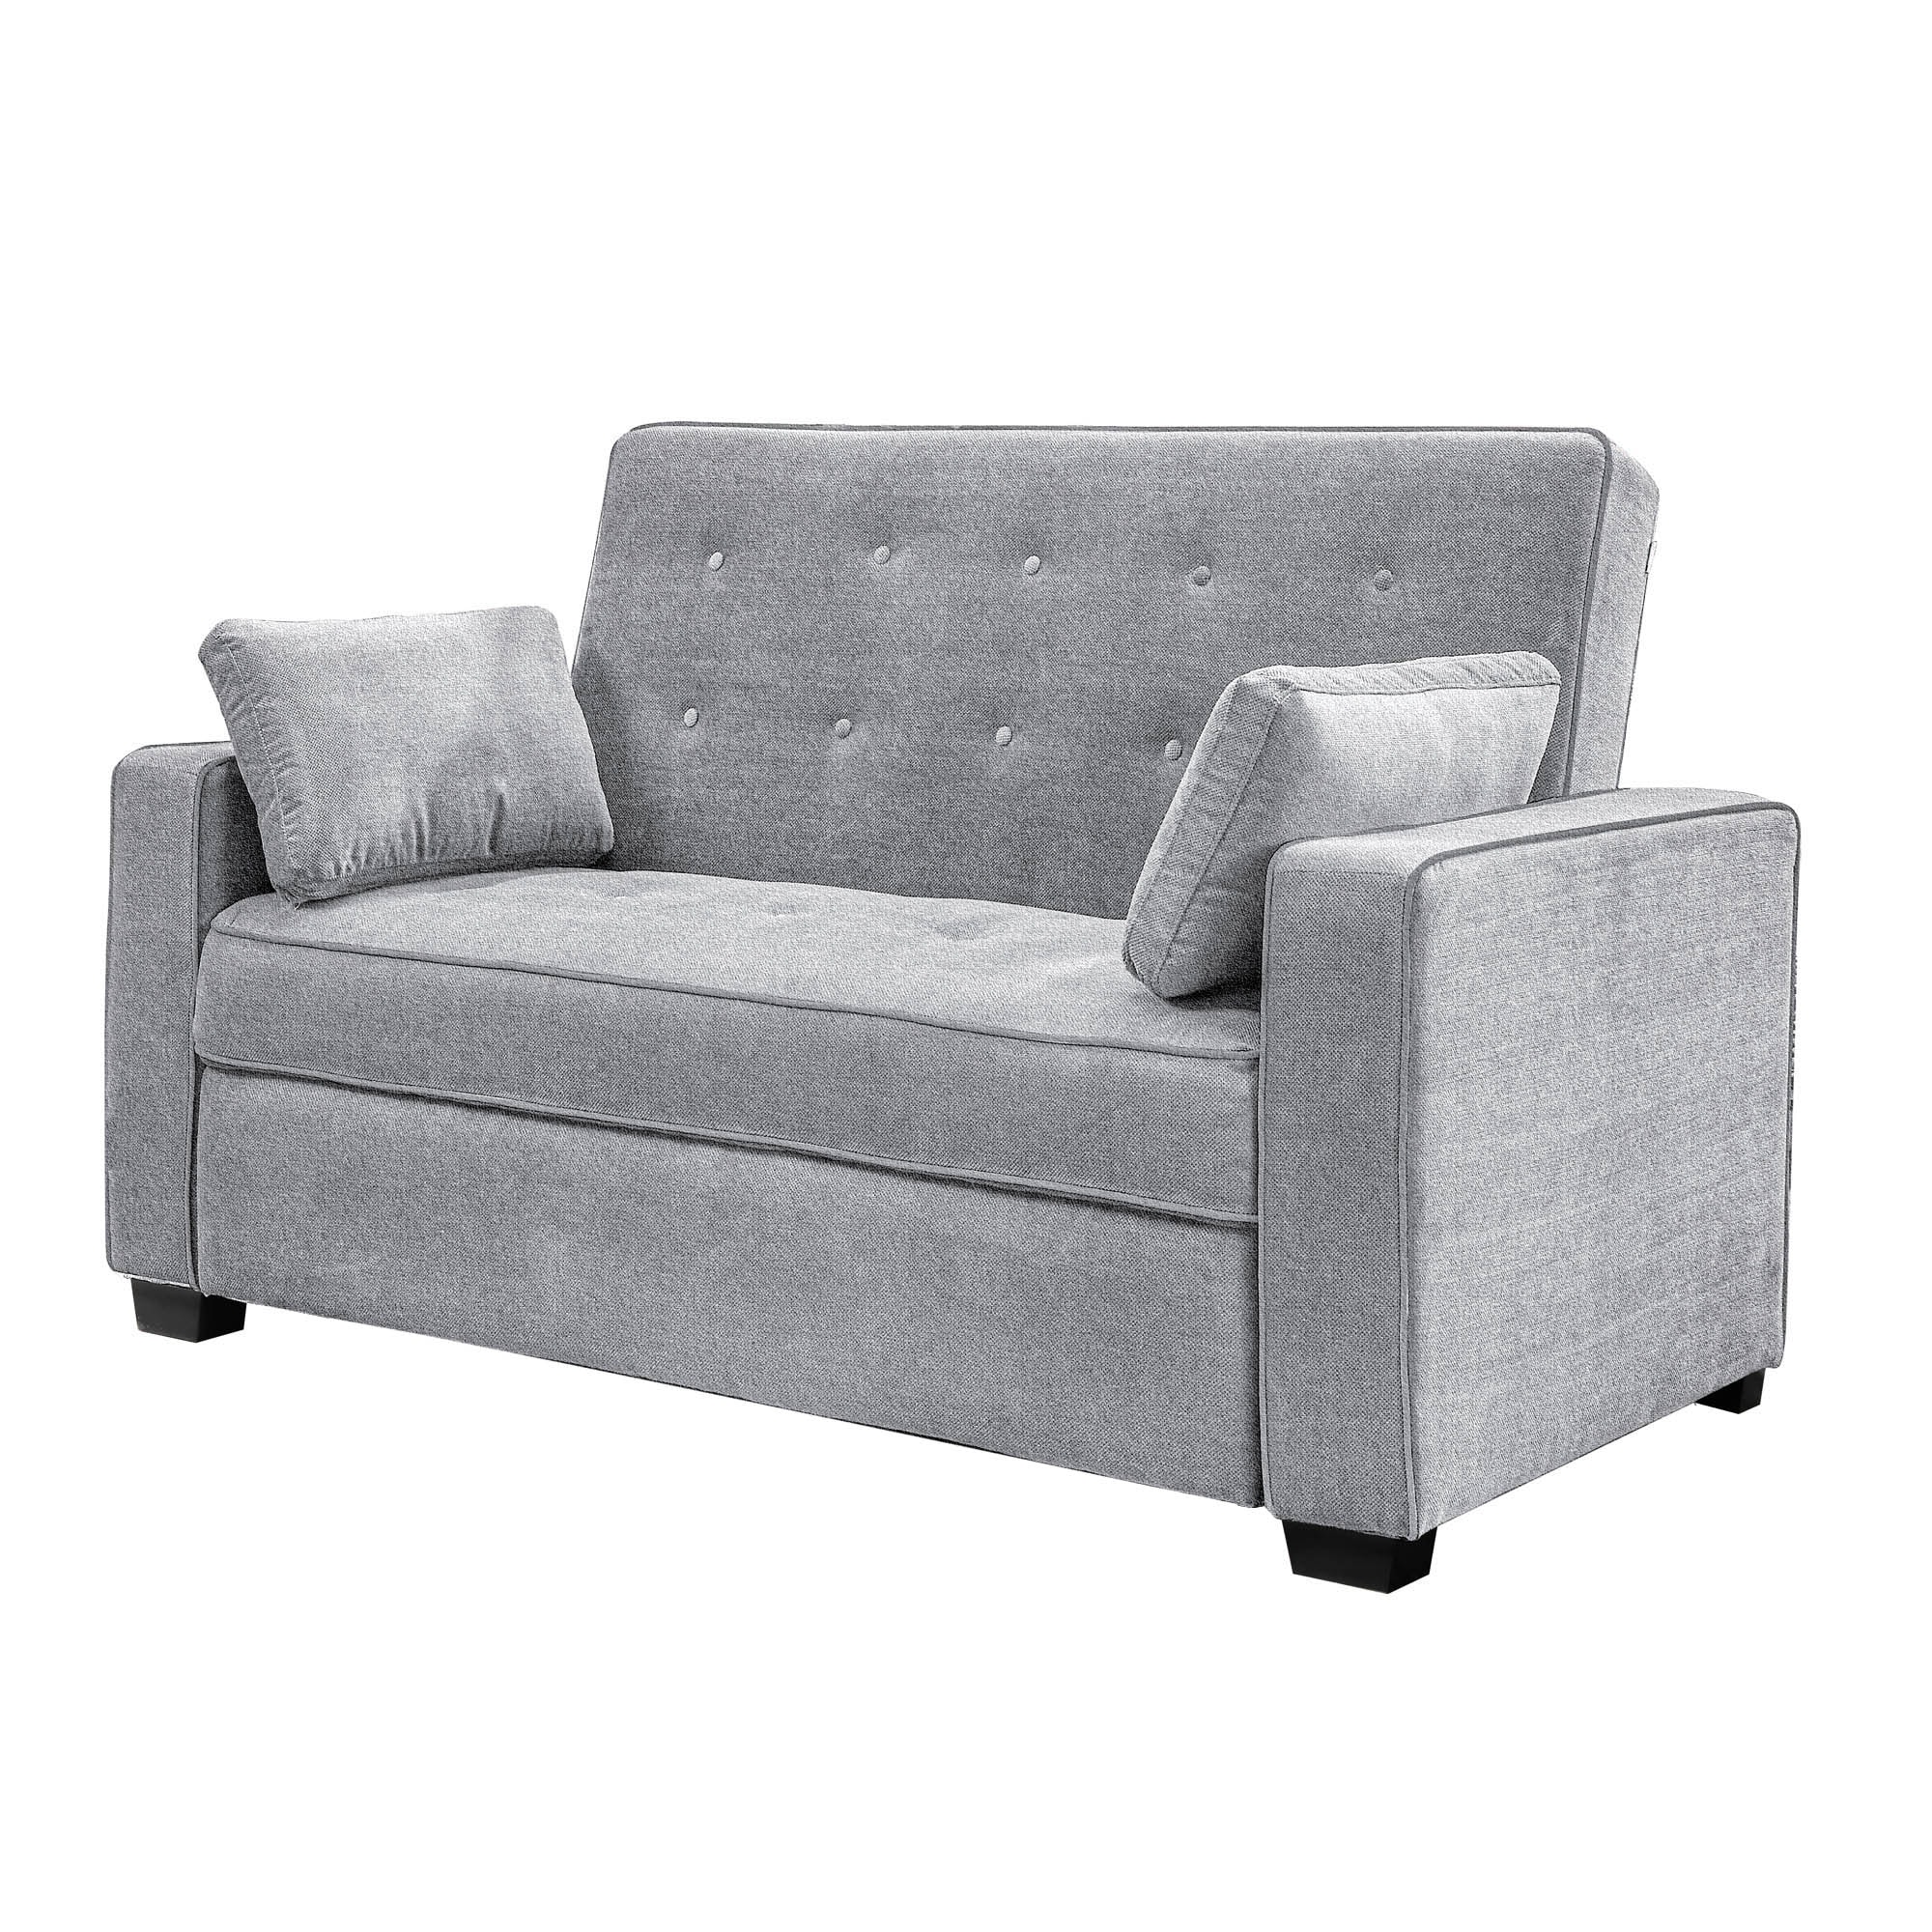 & department Arya Sofa the Light Modern Polyester/Blend Serta in 2-seater Sofas Loveseats at 66.5-in Couches, Grey